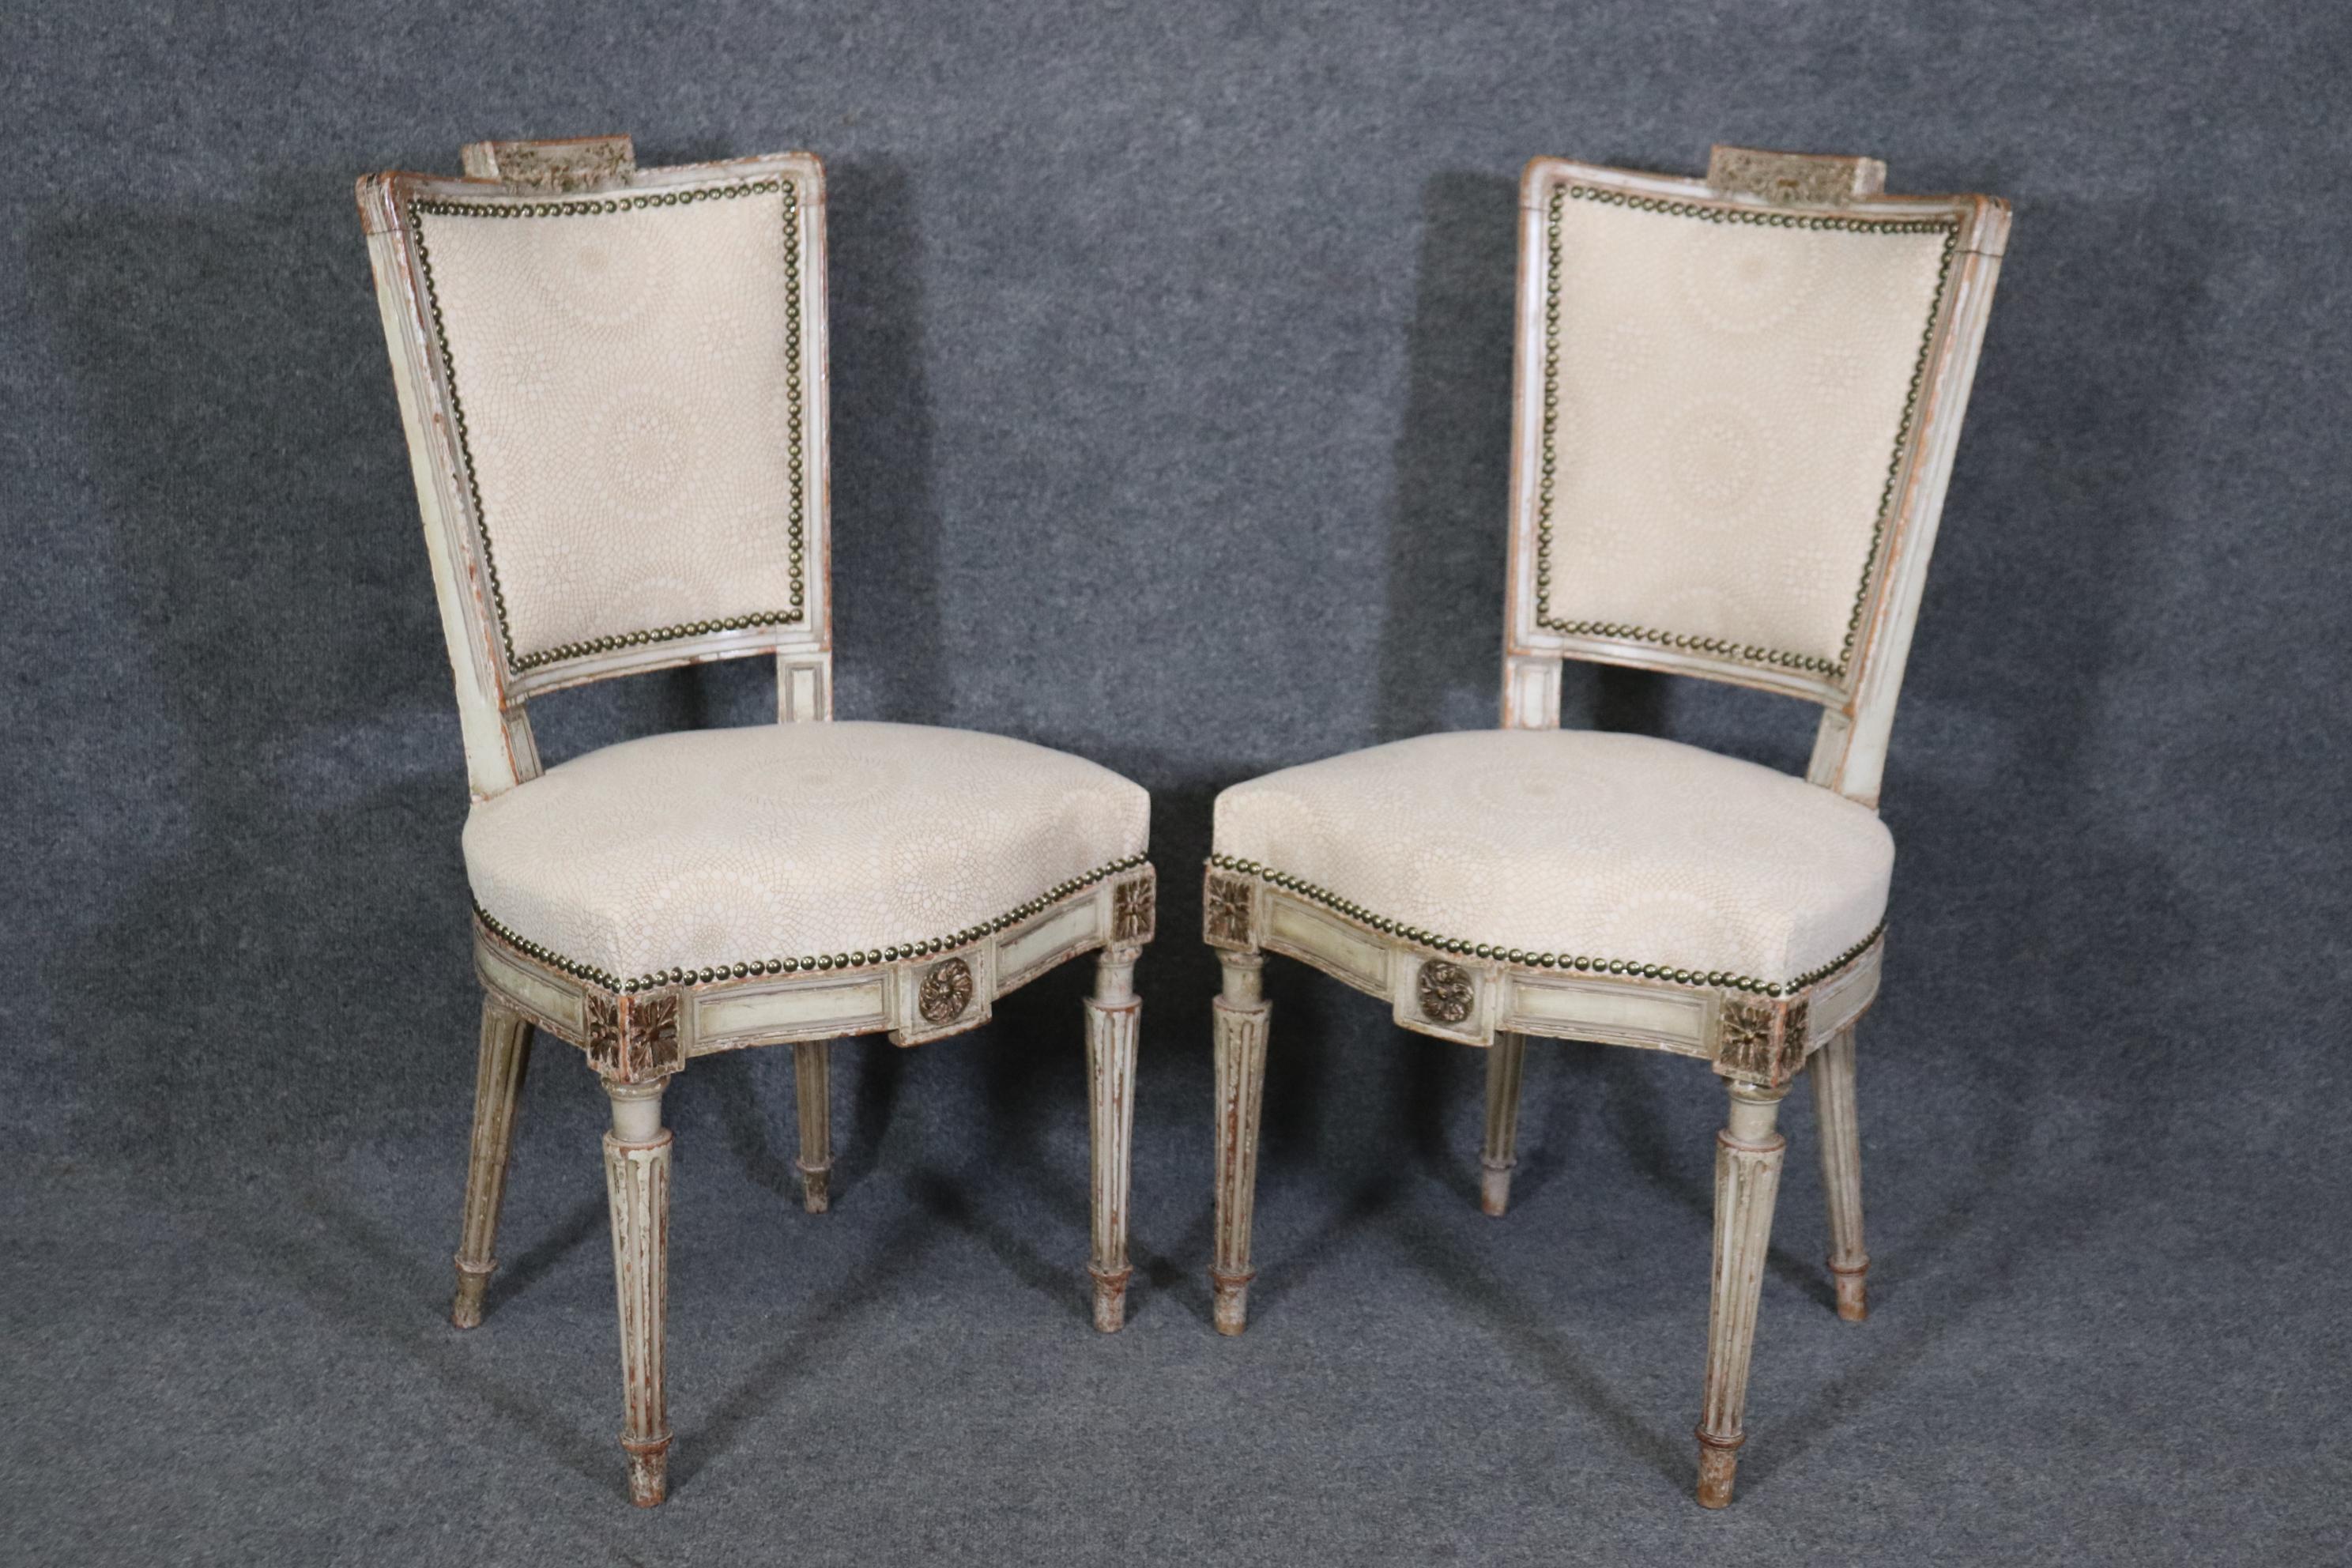 This is a spectacular and rare set of 12 signed Maison Jansen dining chairs in their original finish including the age related distressing that only time cane provide. The chairs are completely reupholstered and in new upholstery. The frames are